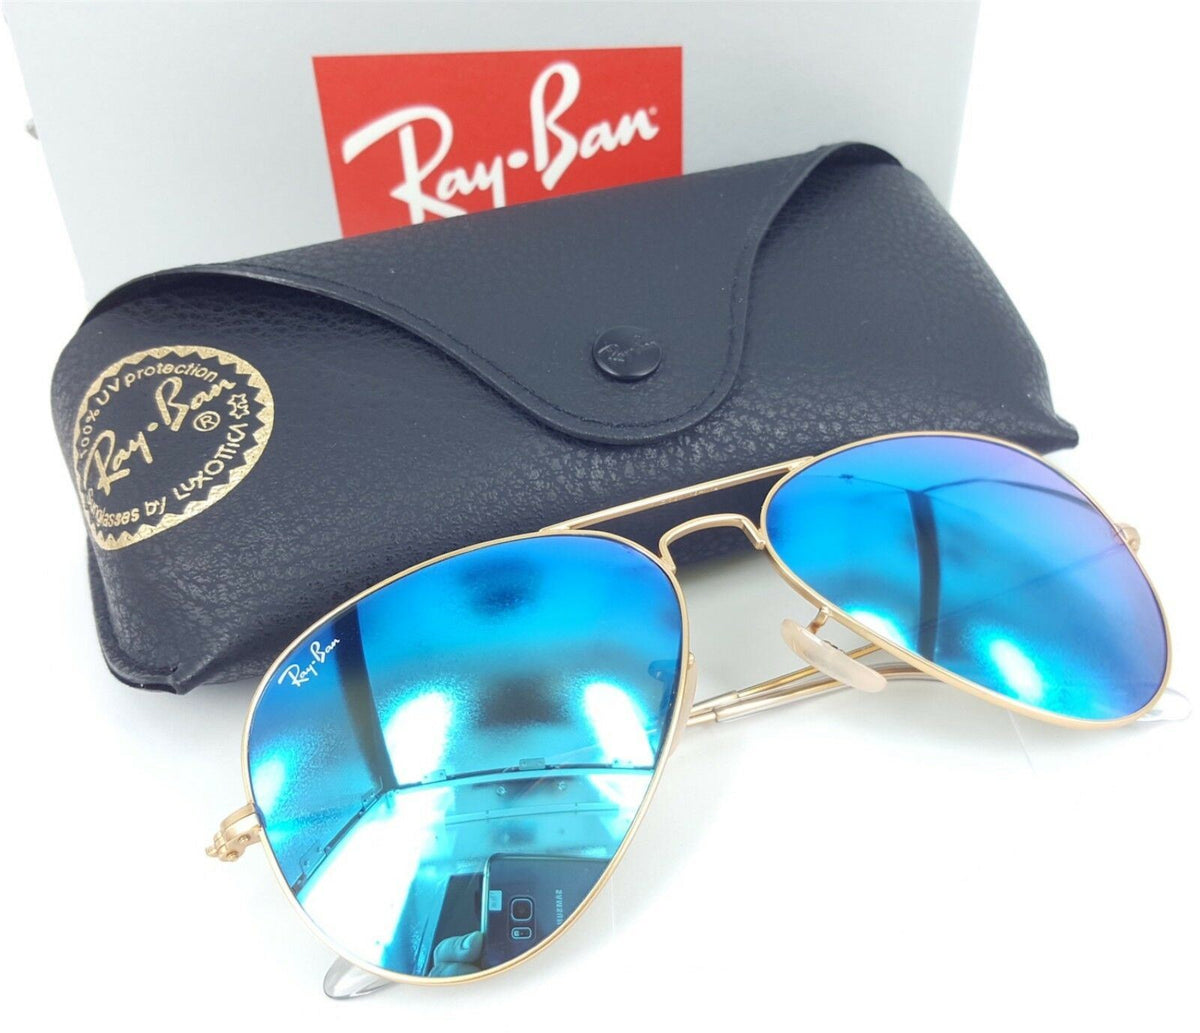 Ray Ban 3025 112/17 Aviator with BLUR MIRROR Lens